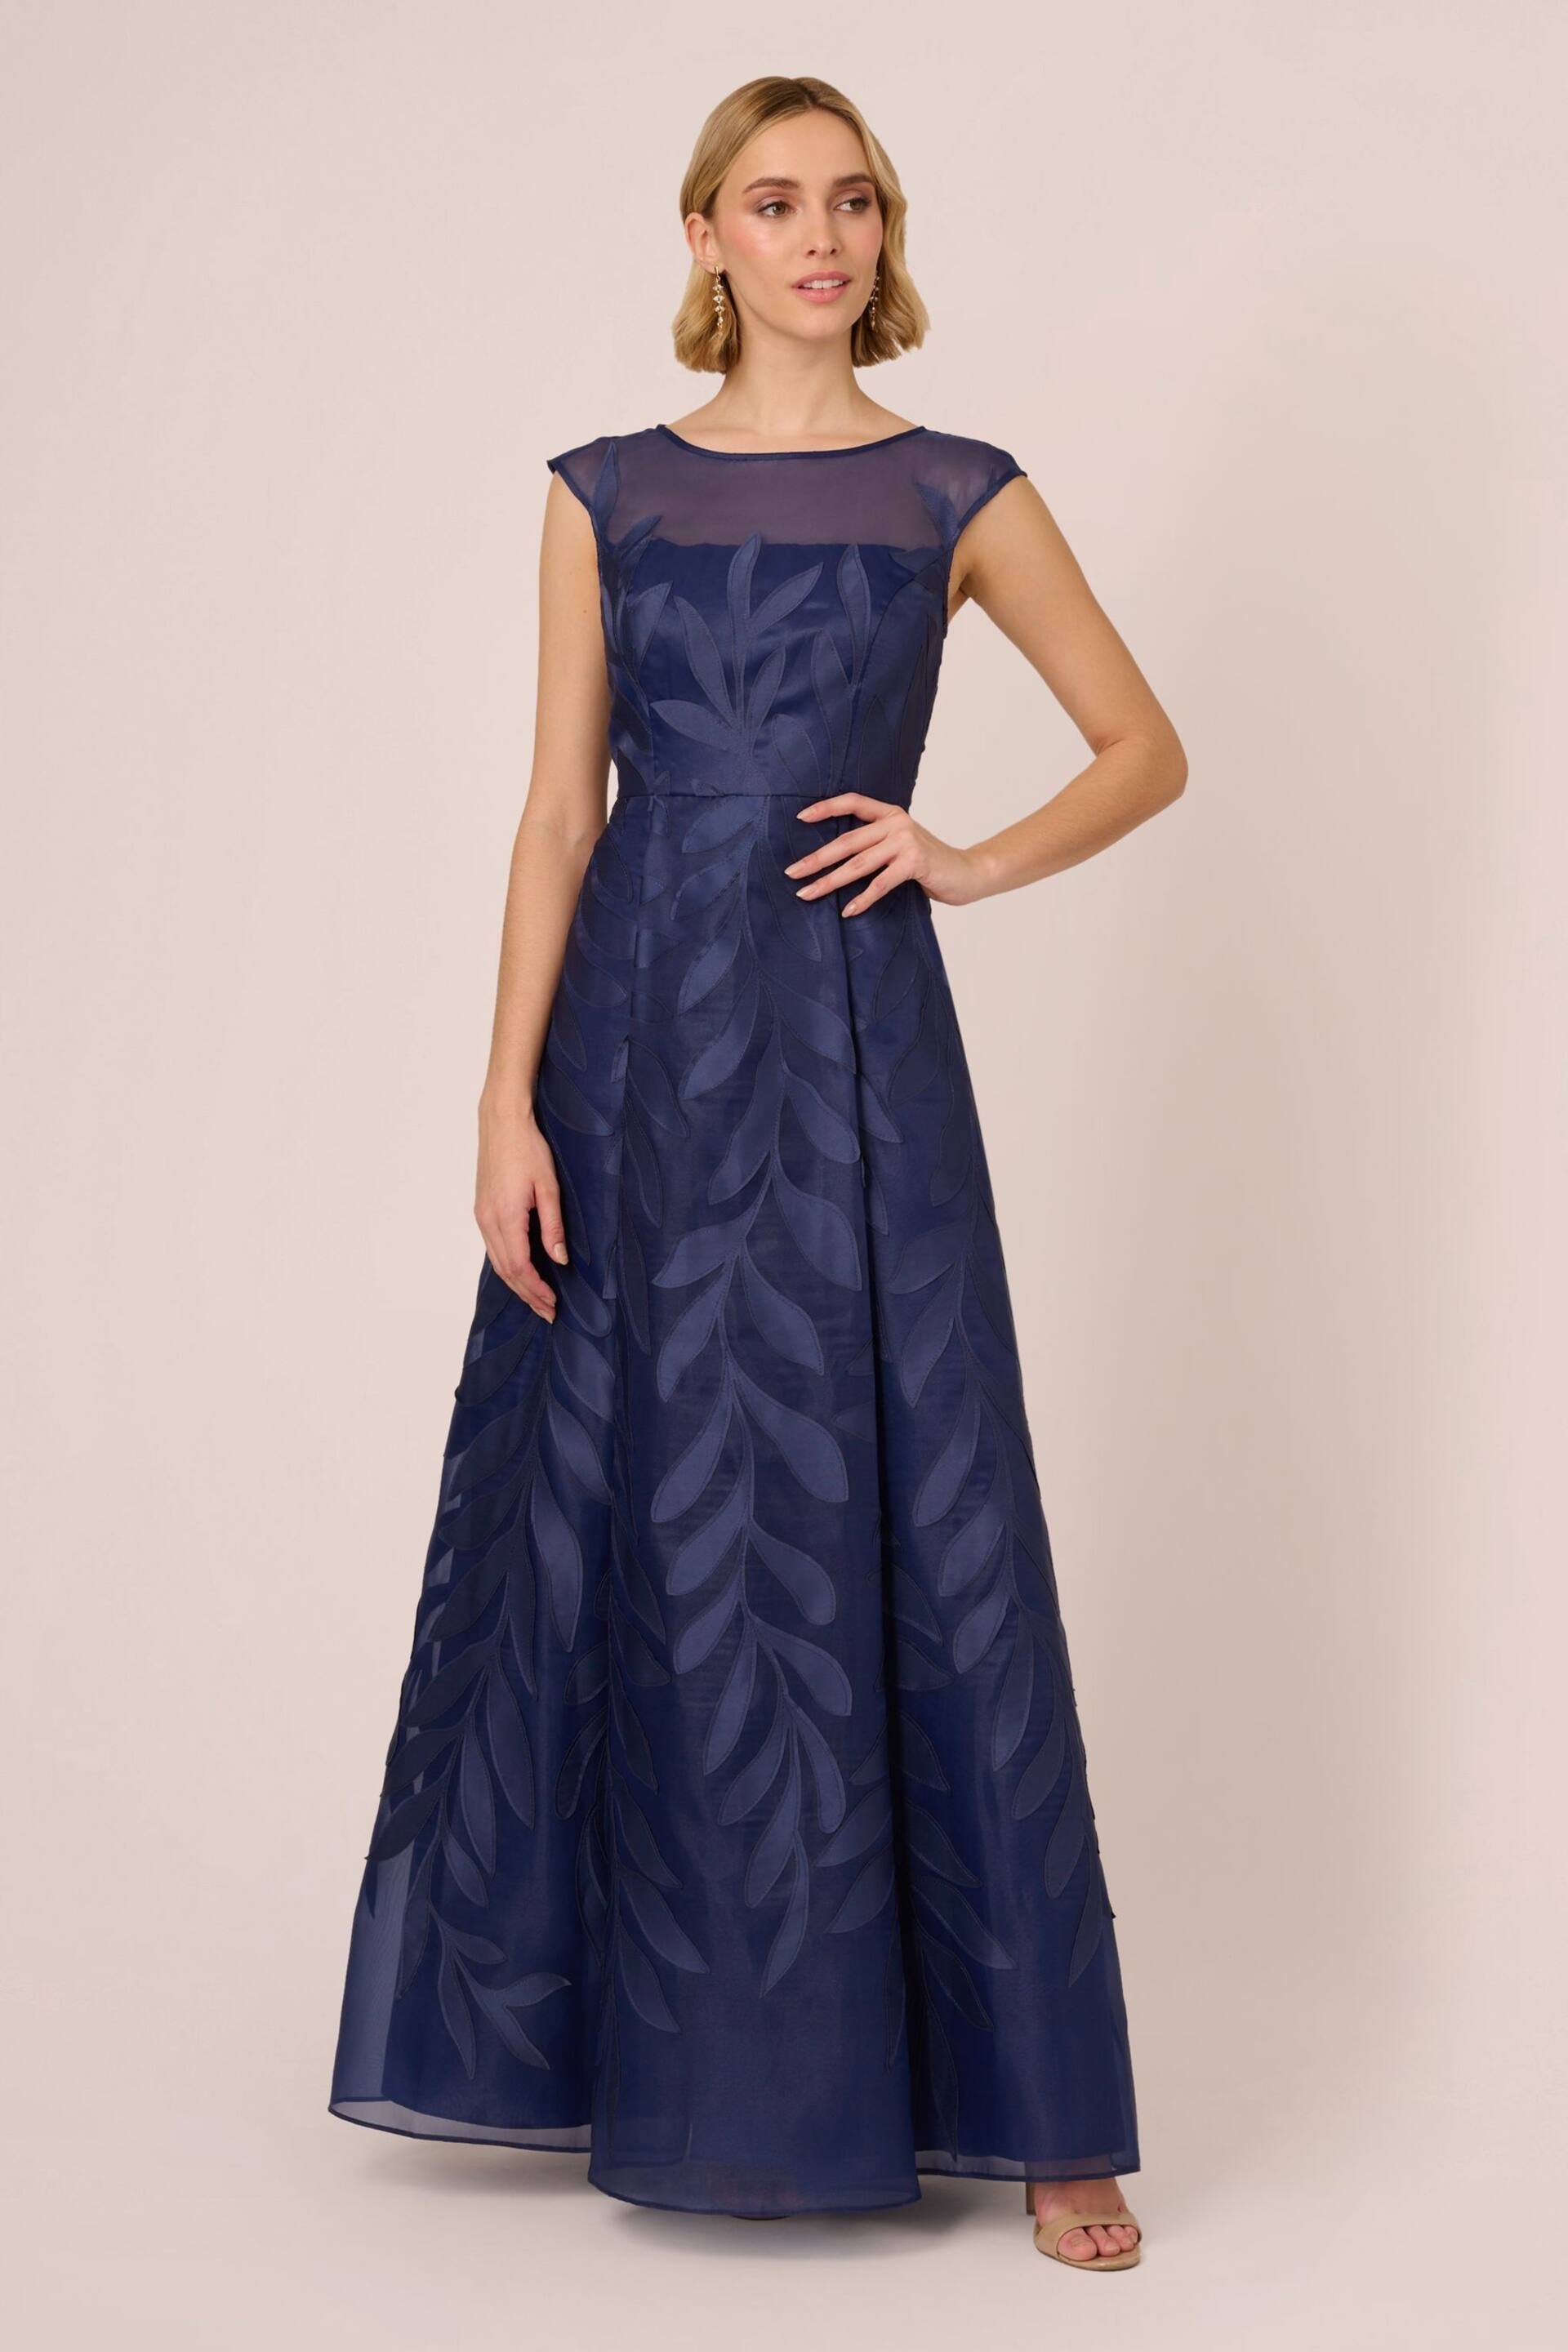 Adrianna Papell Blue Applique Organza Long Gown - Image 1 of 7